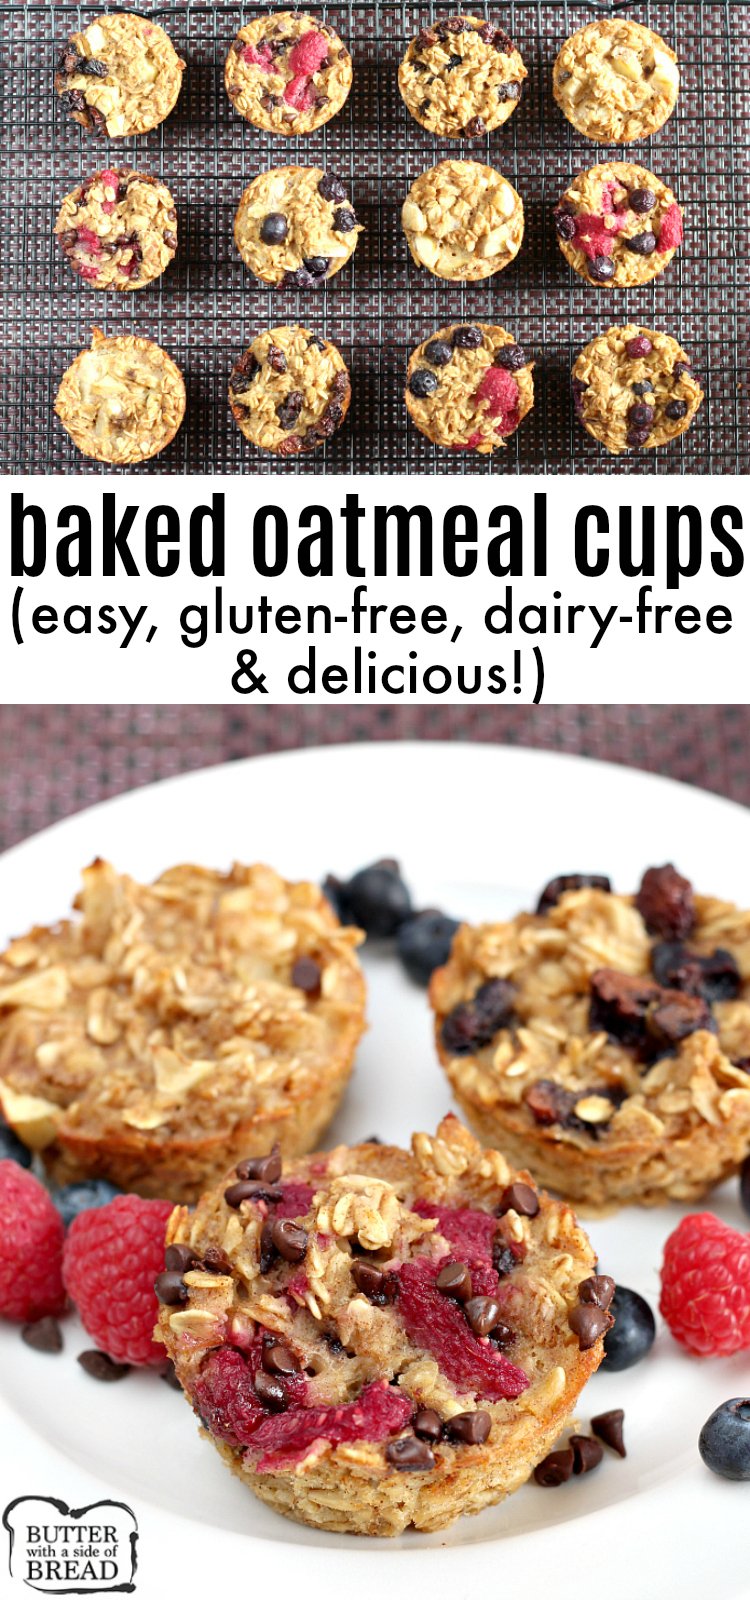 Easy Baked Oatmeal Cups are perfectly portioned and customizable so that everyone in the family can enjoy a quick and healthy breakfast! This baked oatmeal recipe can be enjoyed plain or you can add raspberries, blueberries, chocolate chips, raisins or any other type of topping that you enjoy with oatmeal!